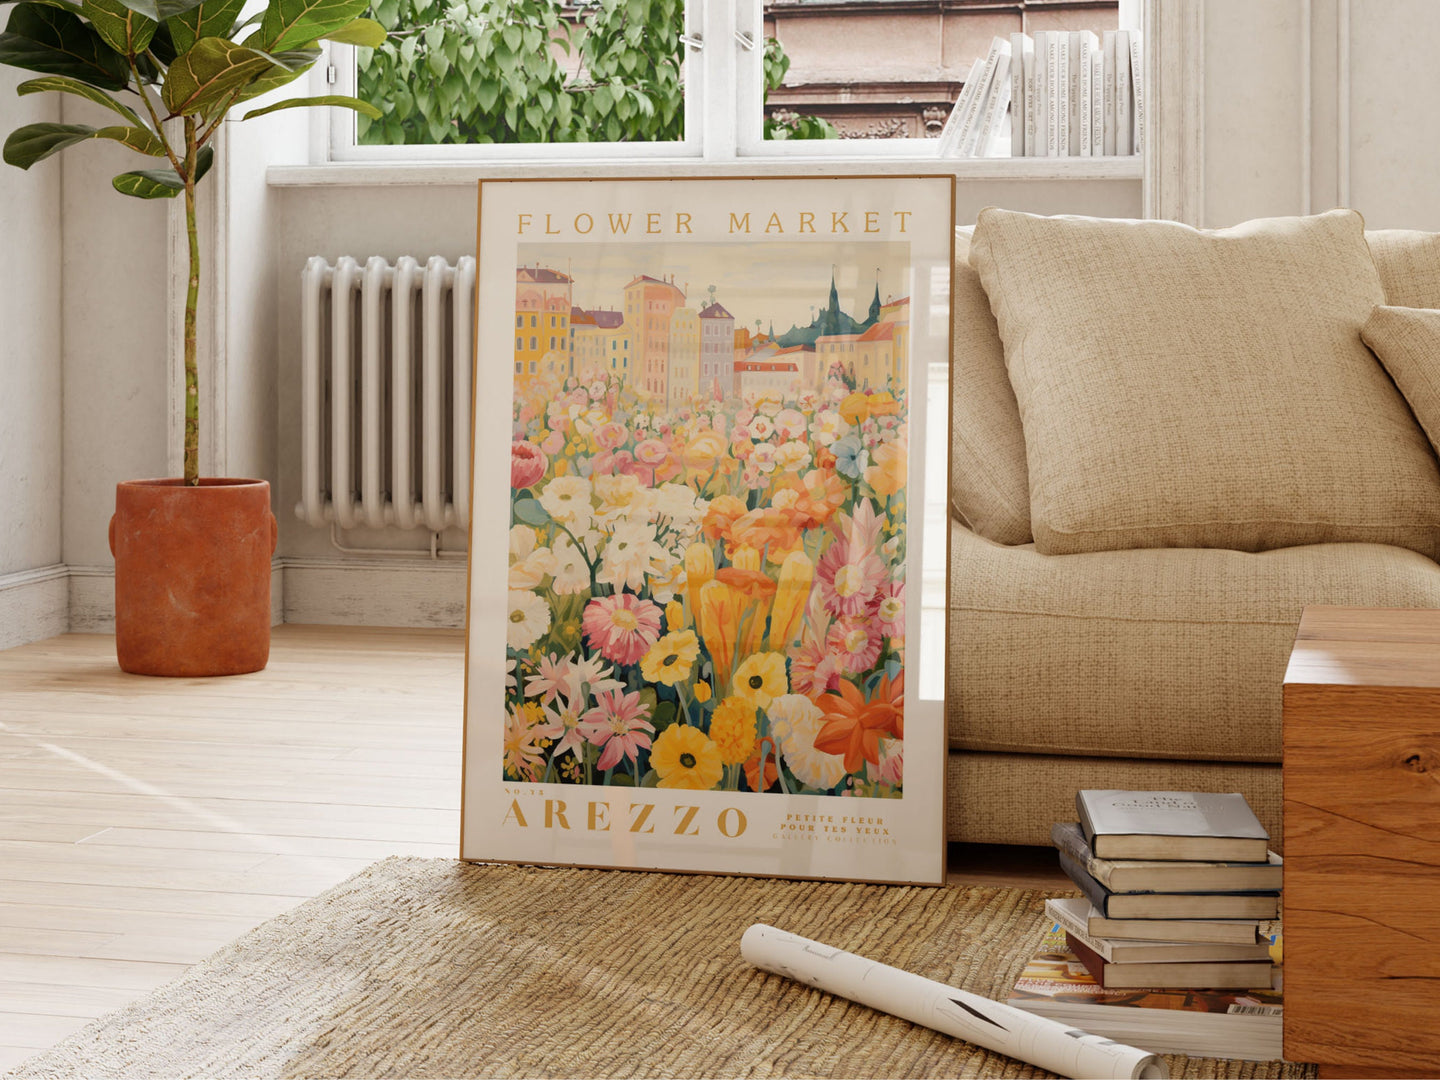 Arezzo Flower Market Poster, Italy Travel Art, Yellow Peony, Roses, Floral Poster, Floral Illustration, Flower Art Print, Tuscany Wall Art